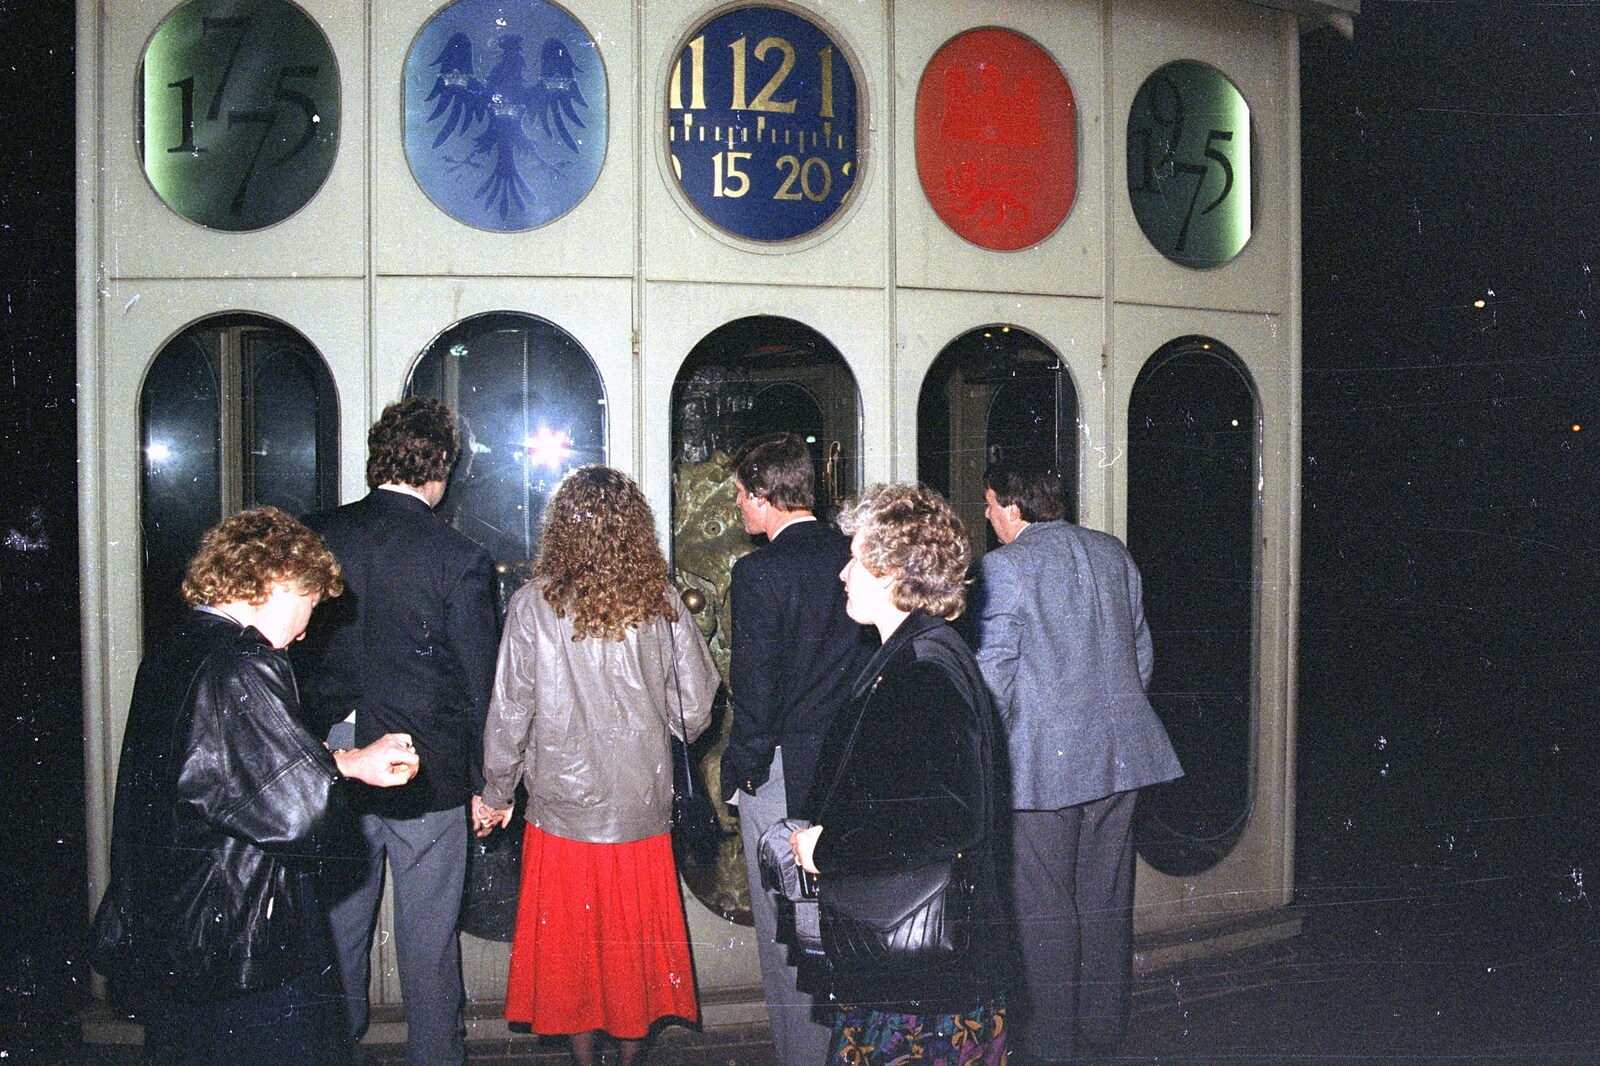 There's a curious clock in Chaplefield Gardens from Clays Does Bruges, Belgium - 19th December 1992